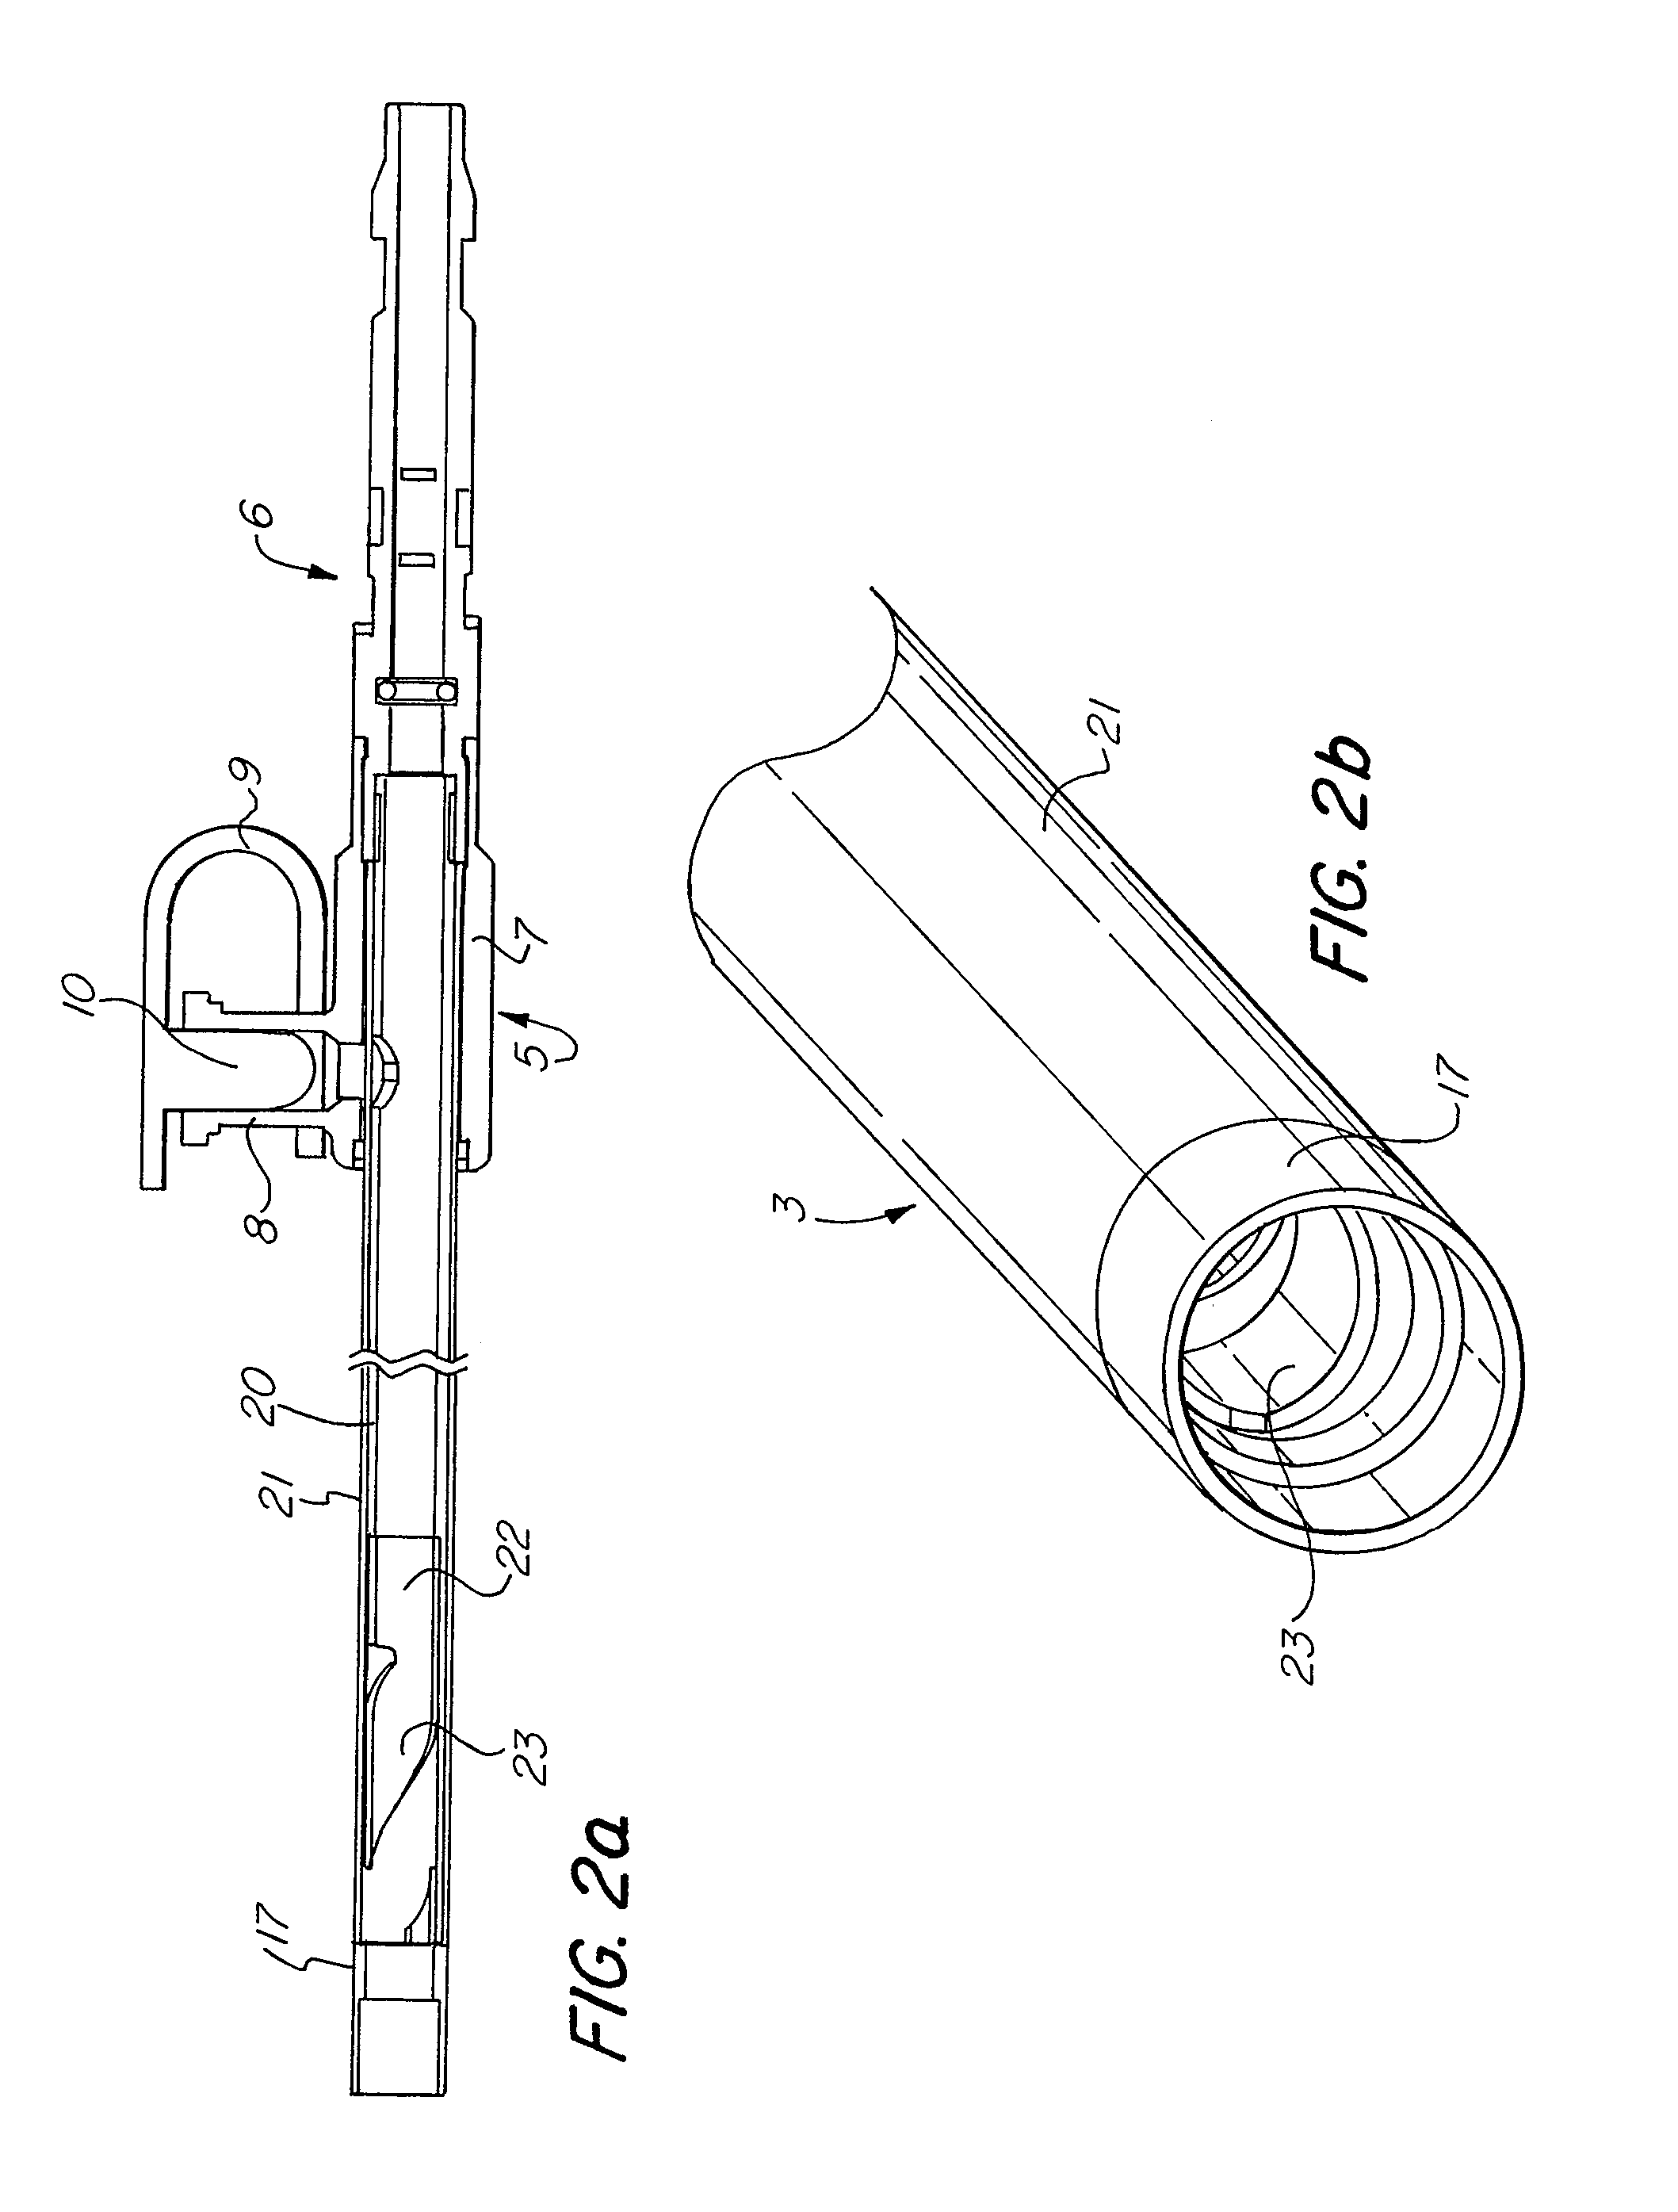 Endoscopic instrument, and shaft for an endoscopic instrument